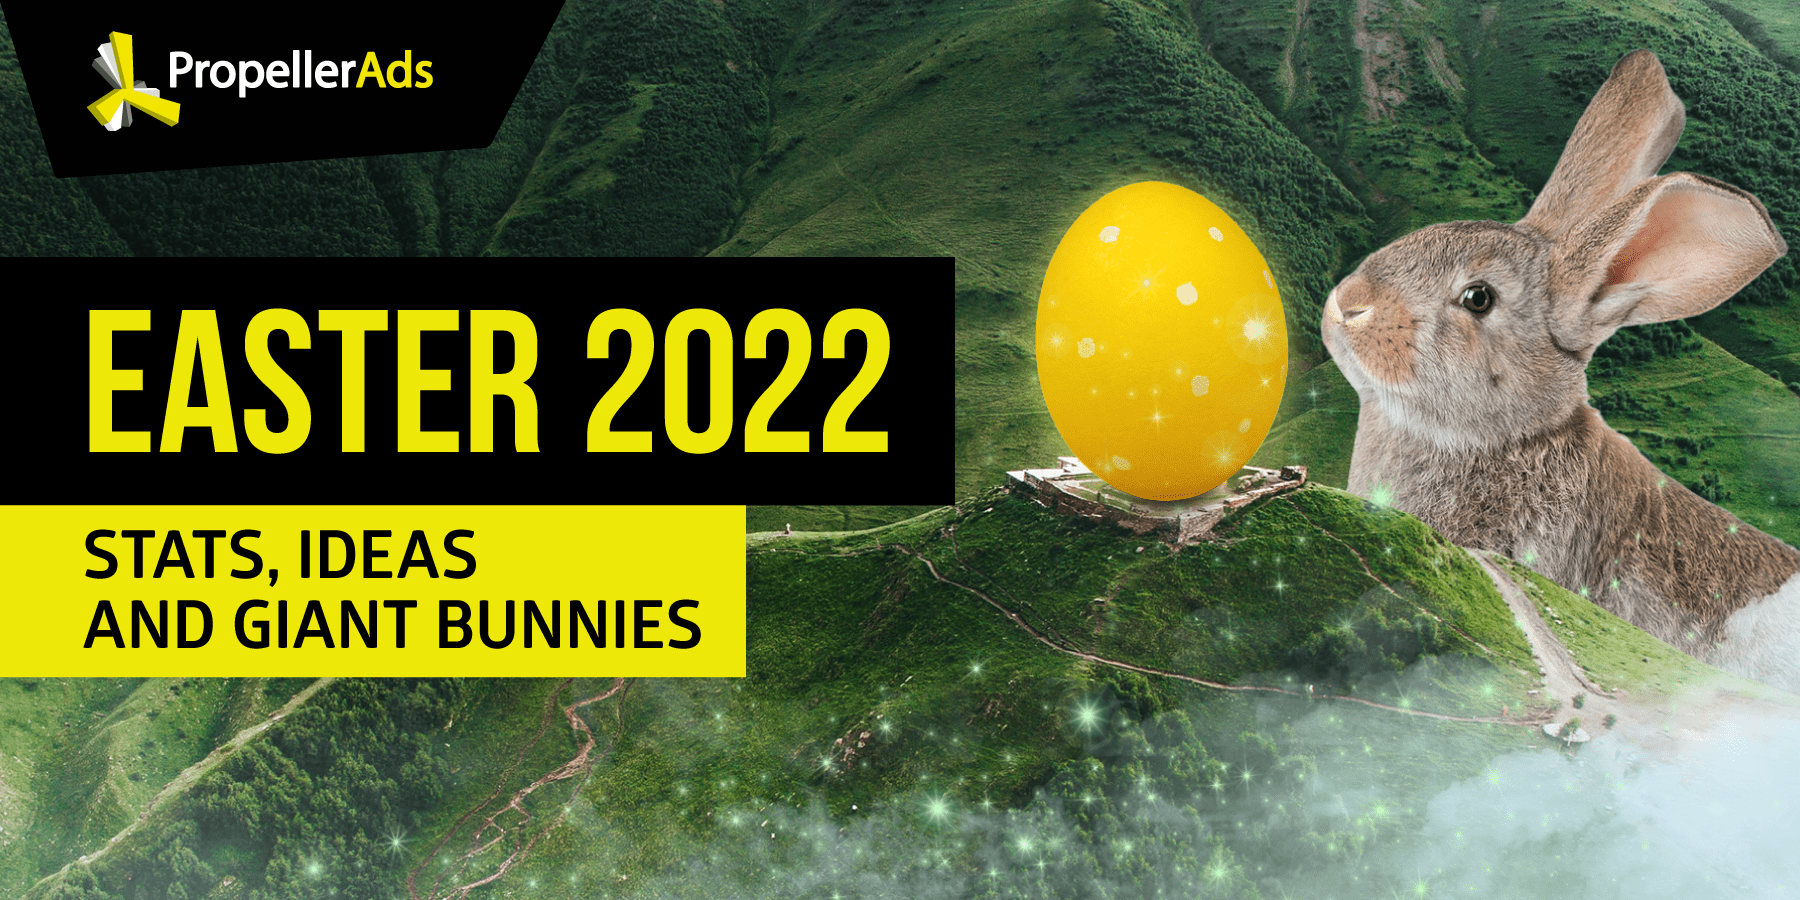 Easter 2022 Campaigns